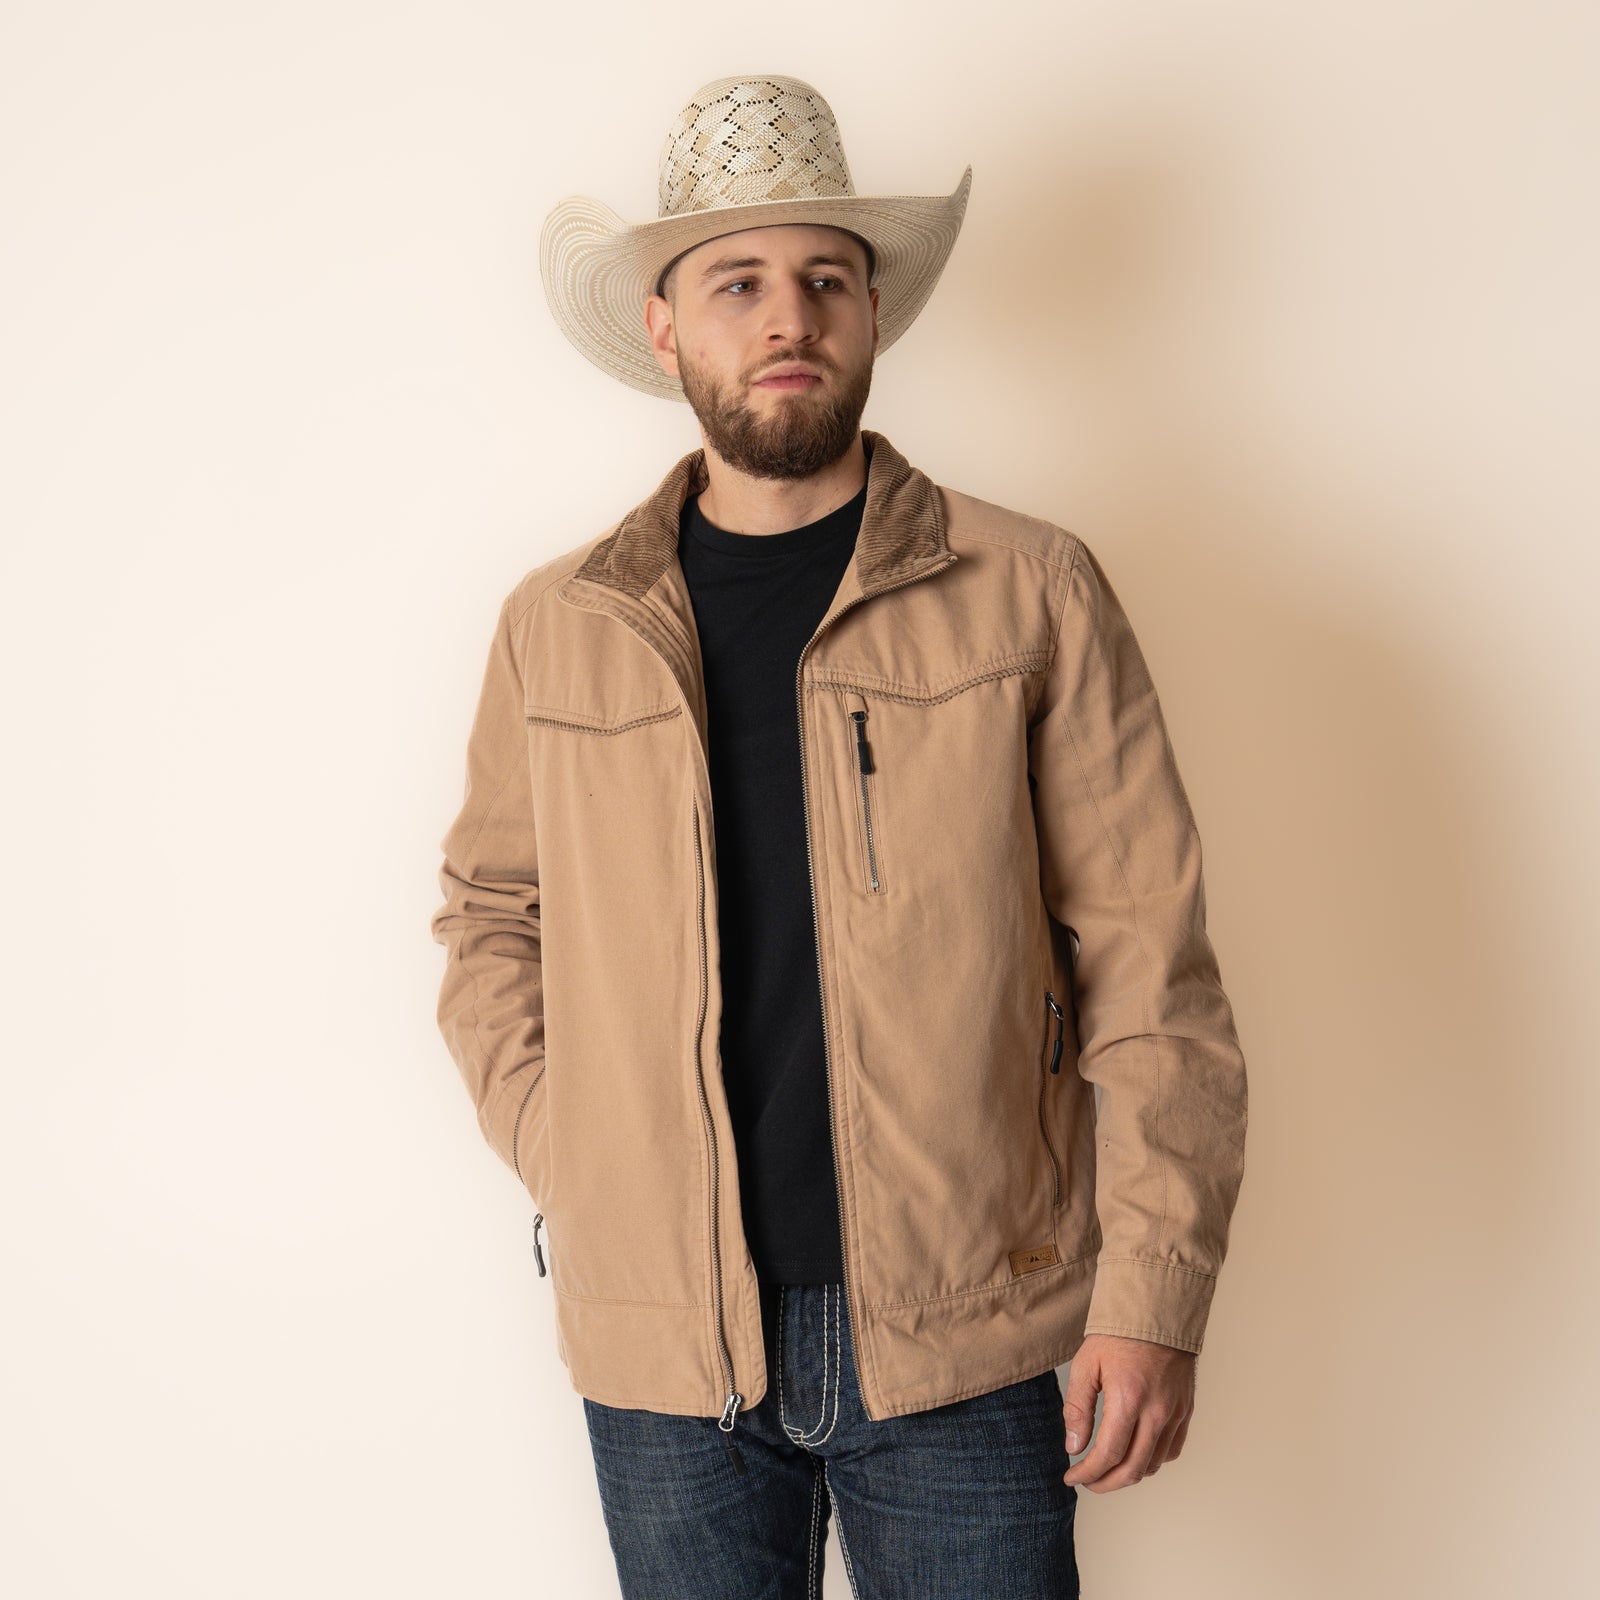 Chamarra Panhandle Conceal & Carry Cotton Tan Caballero